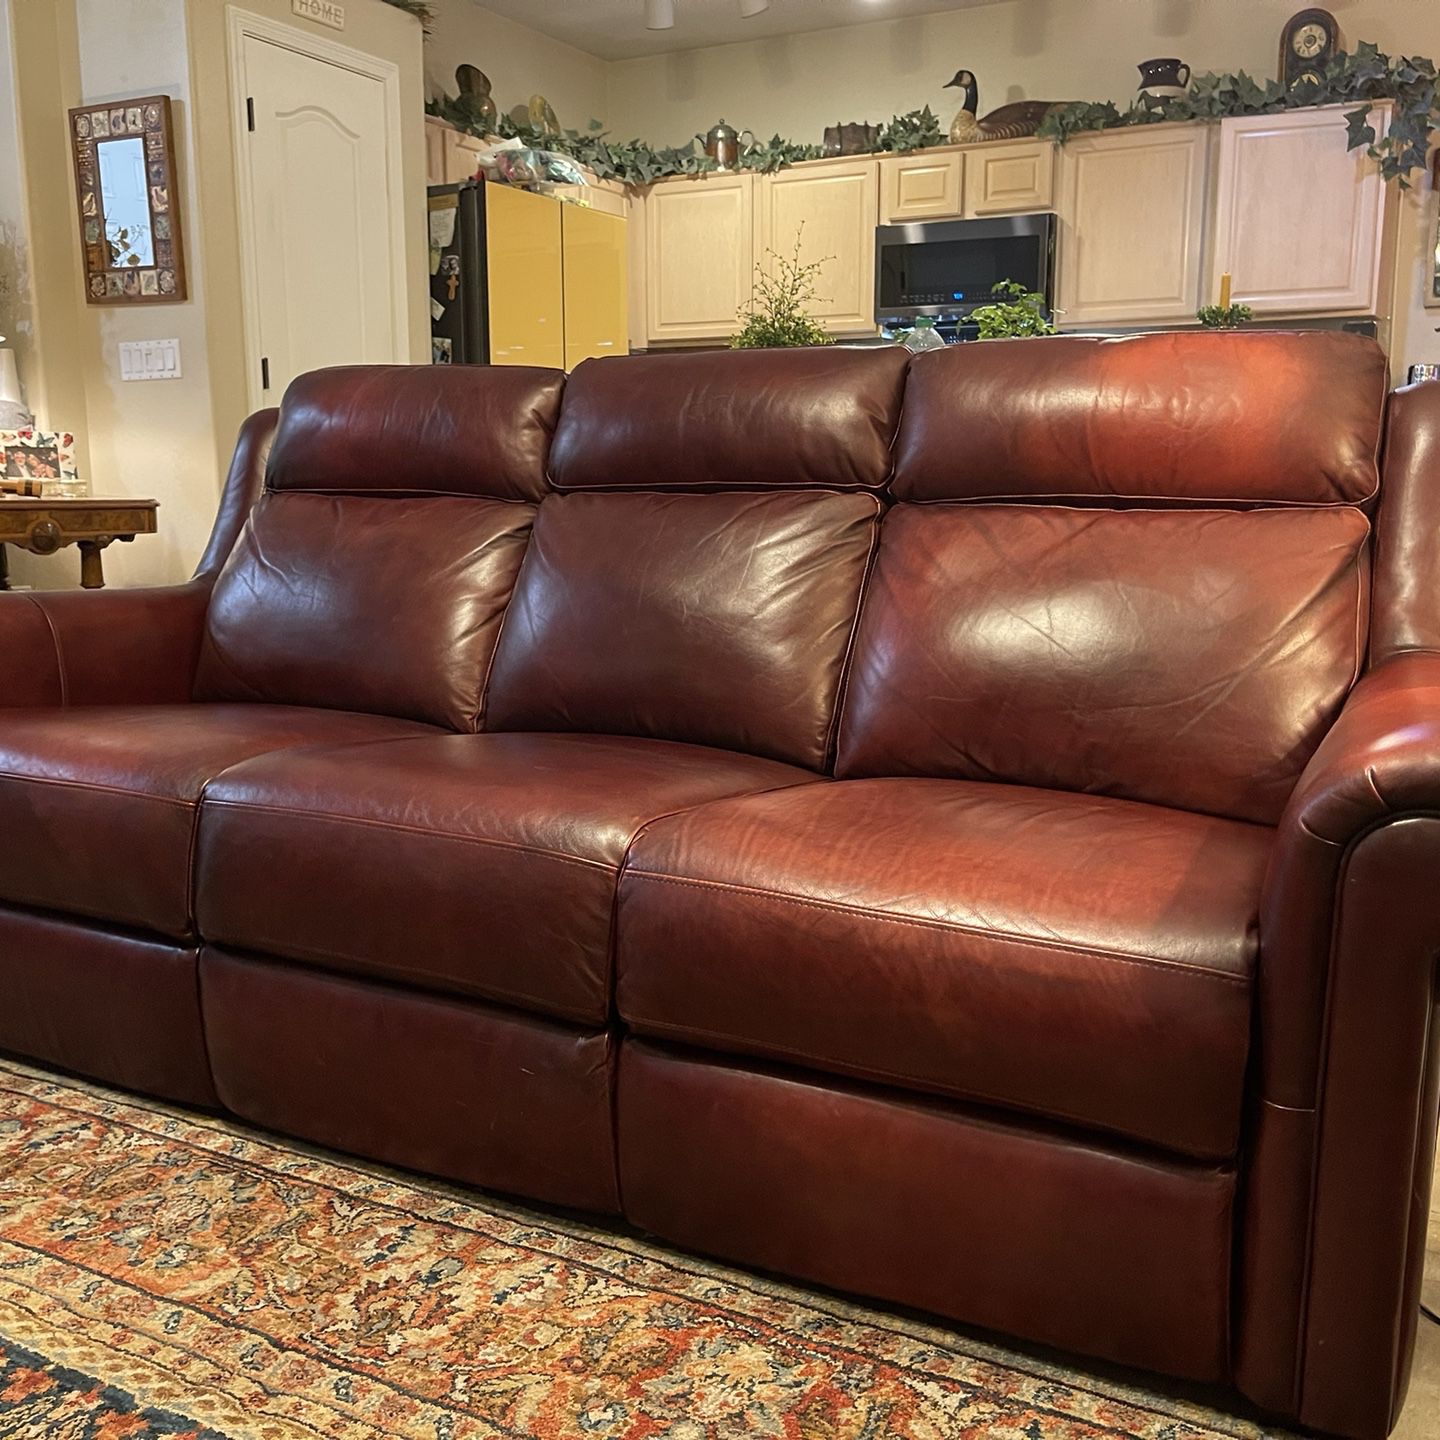 Top Grain Leather Power Reclining Sofa & Chair 5 Yrs Old